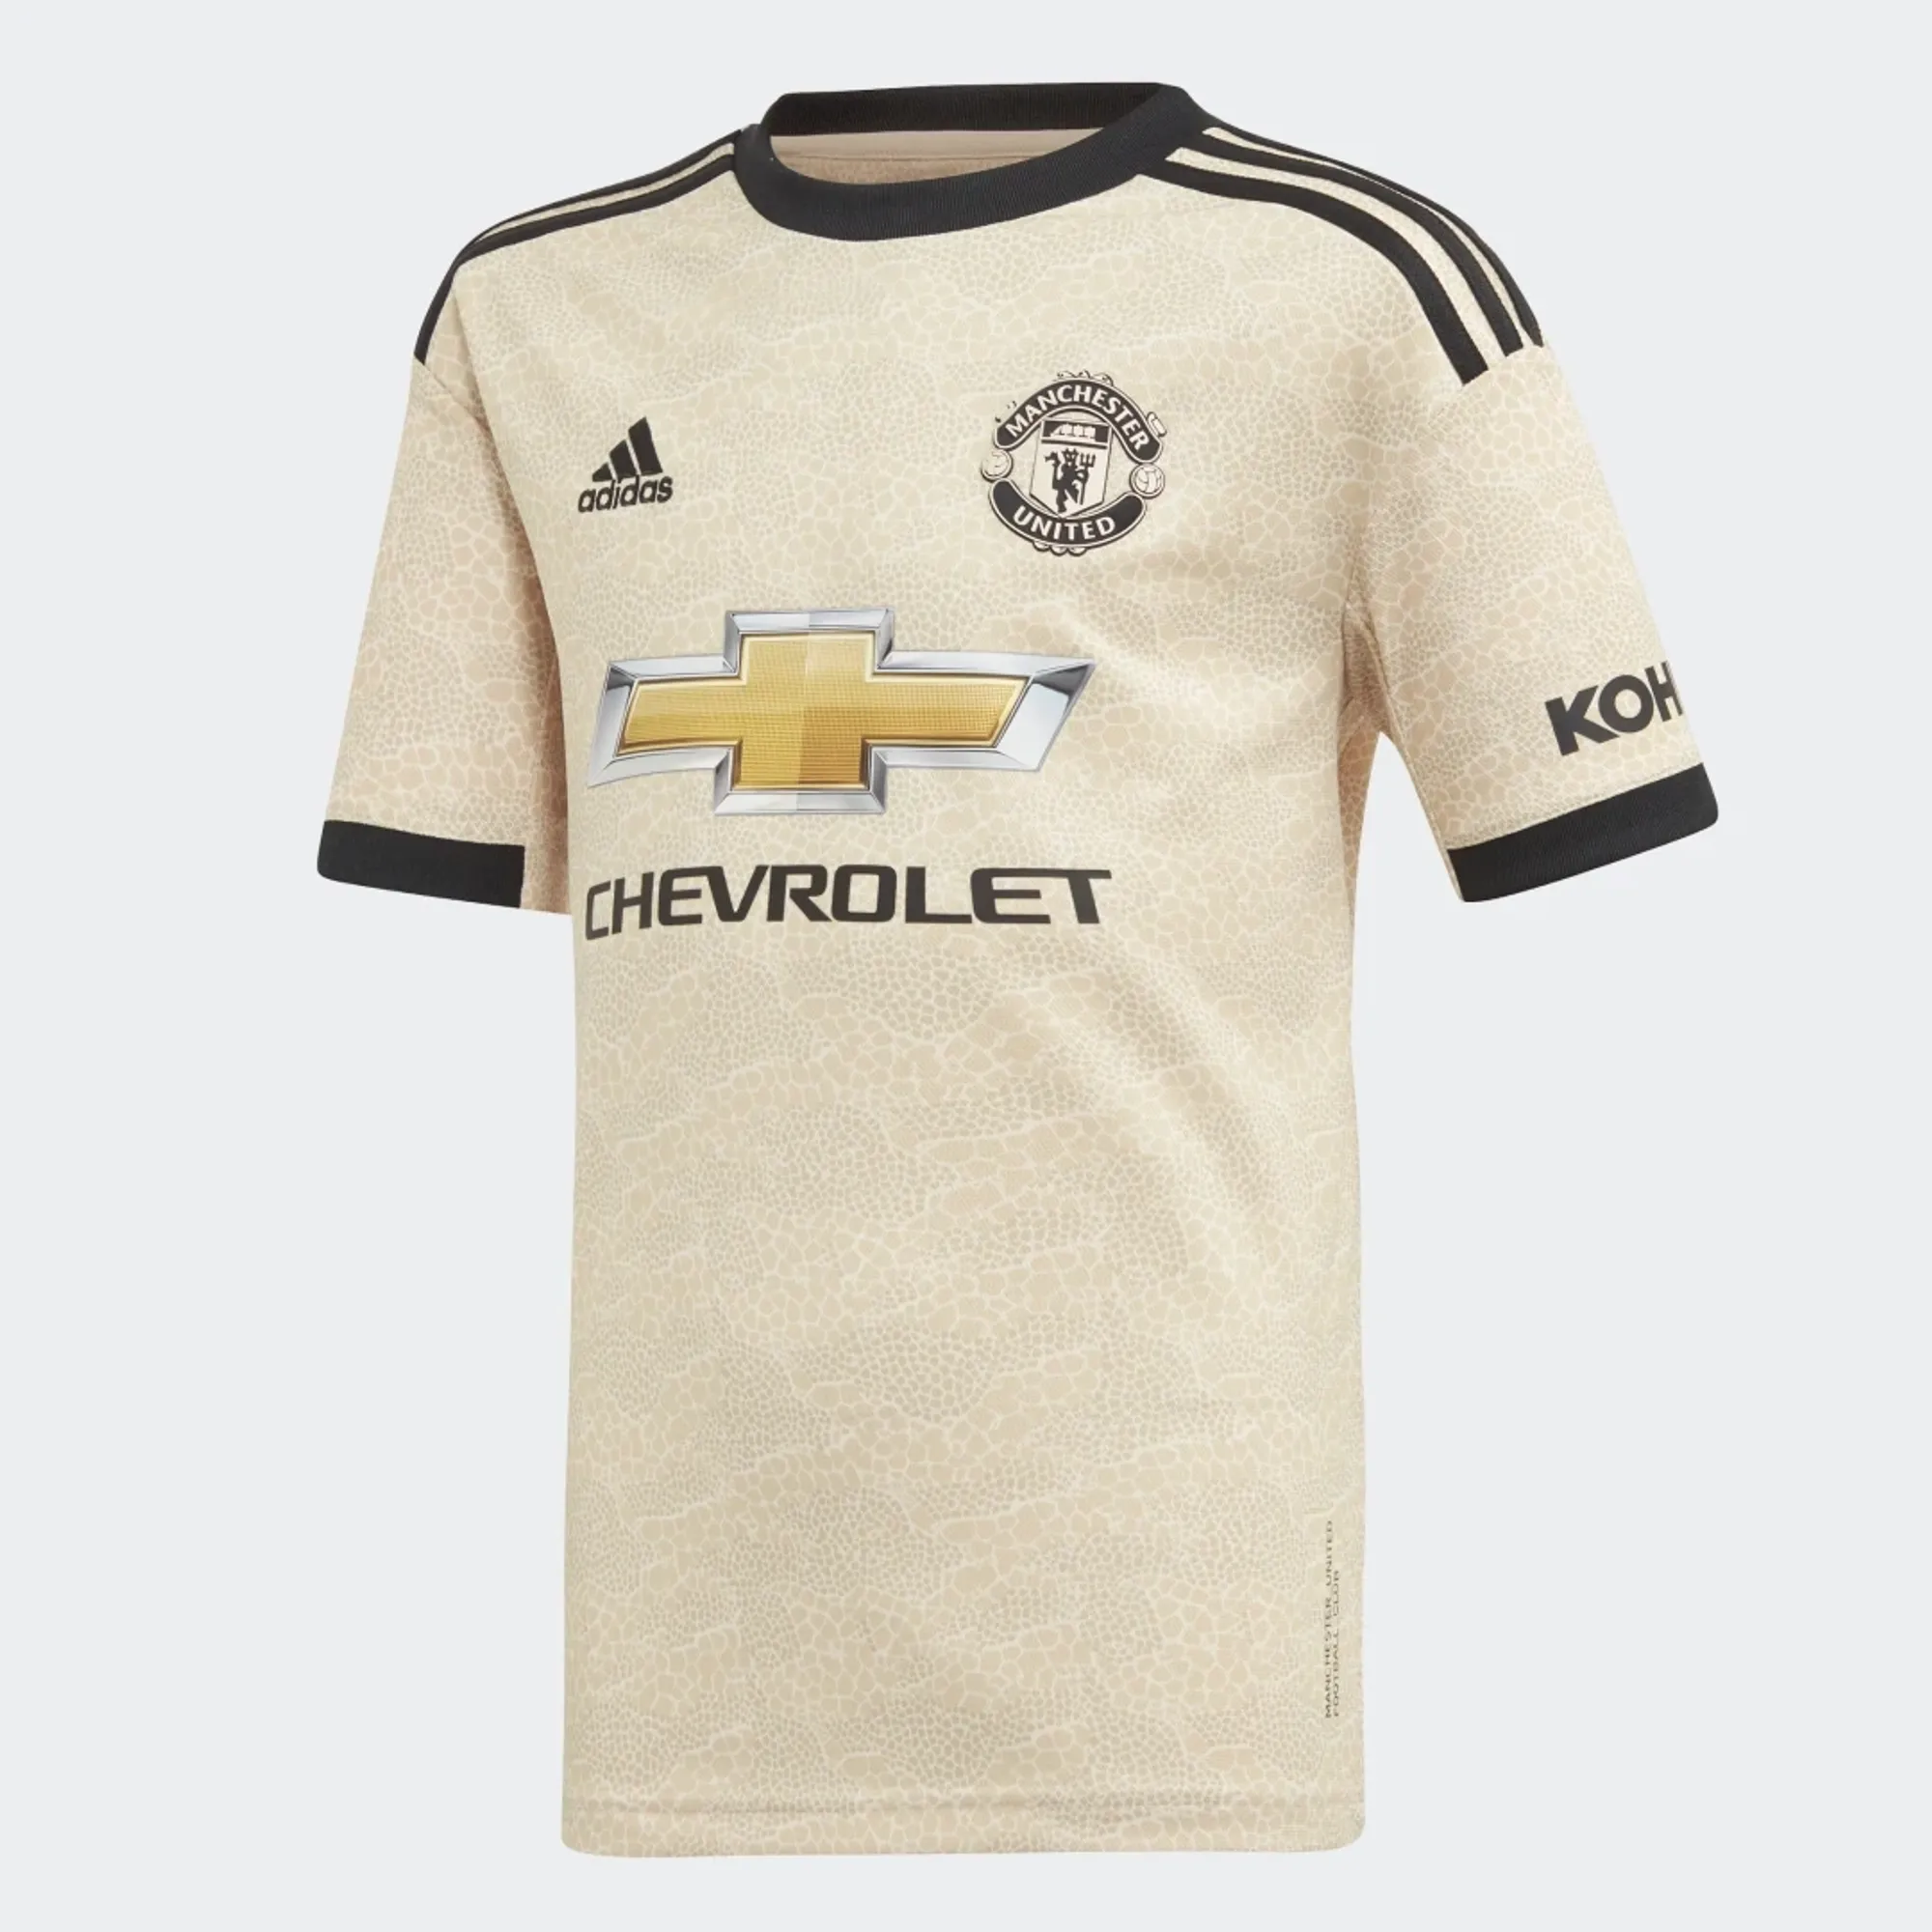 manchester united home kit price